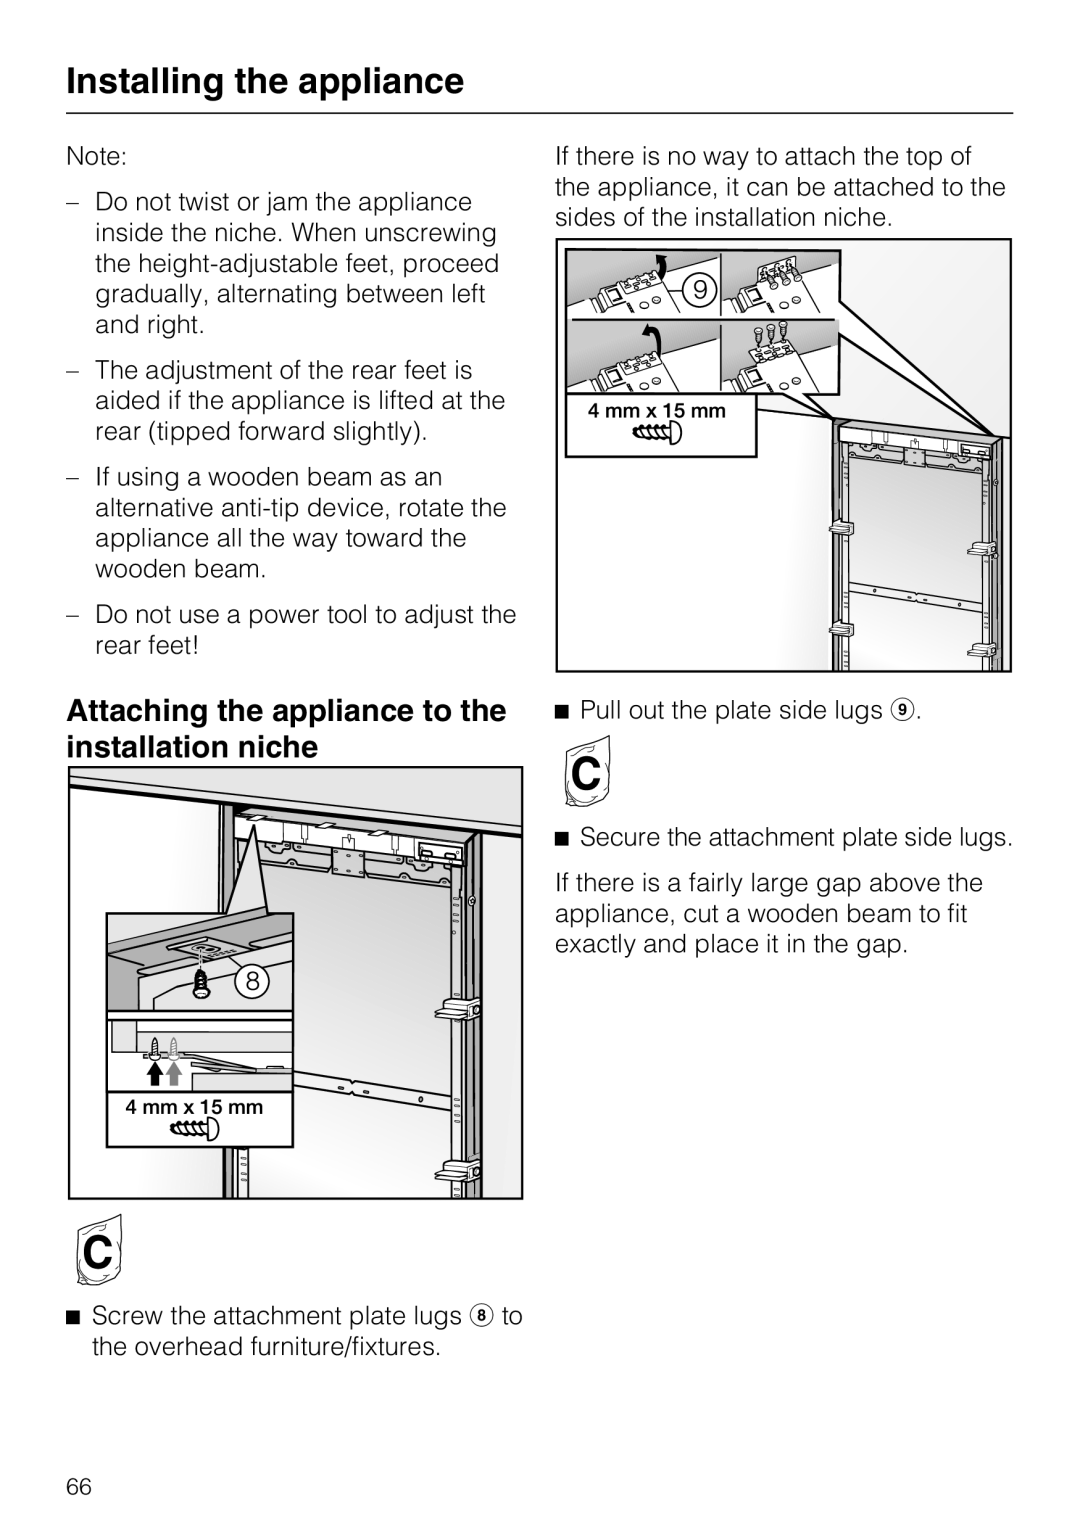 Miele F1471VI installation instructions Attaching the appliance to the installation niche, Installing the appliance 